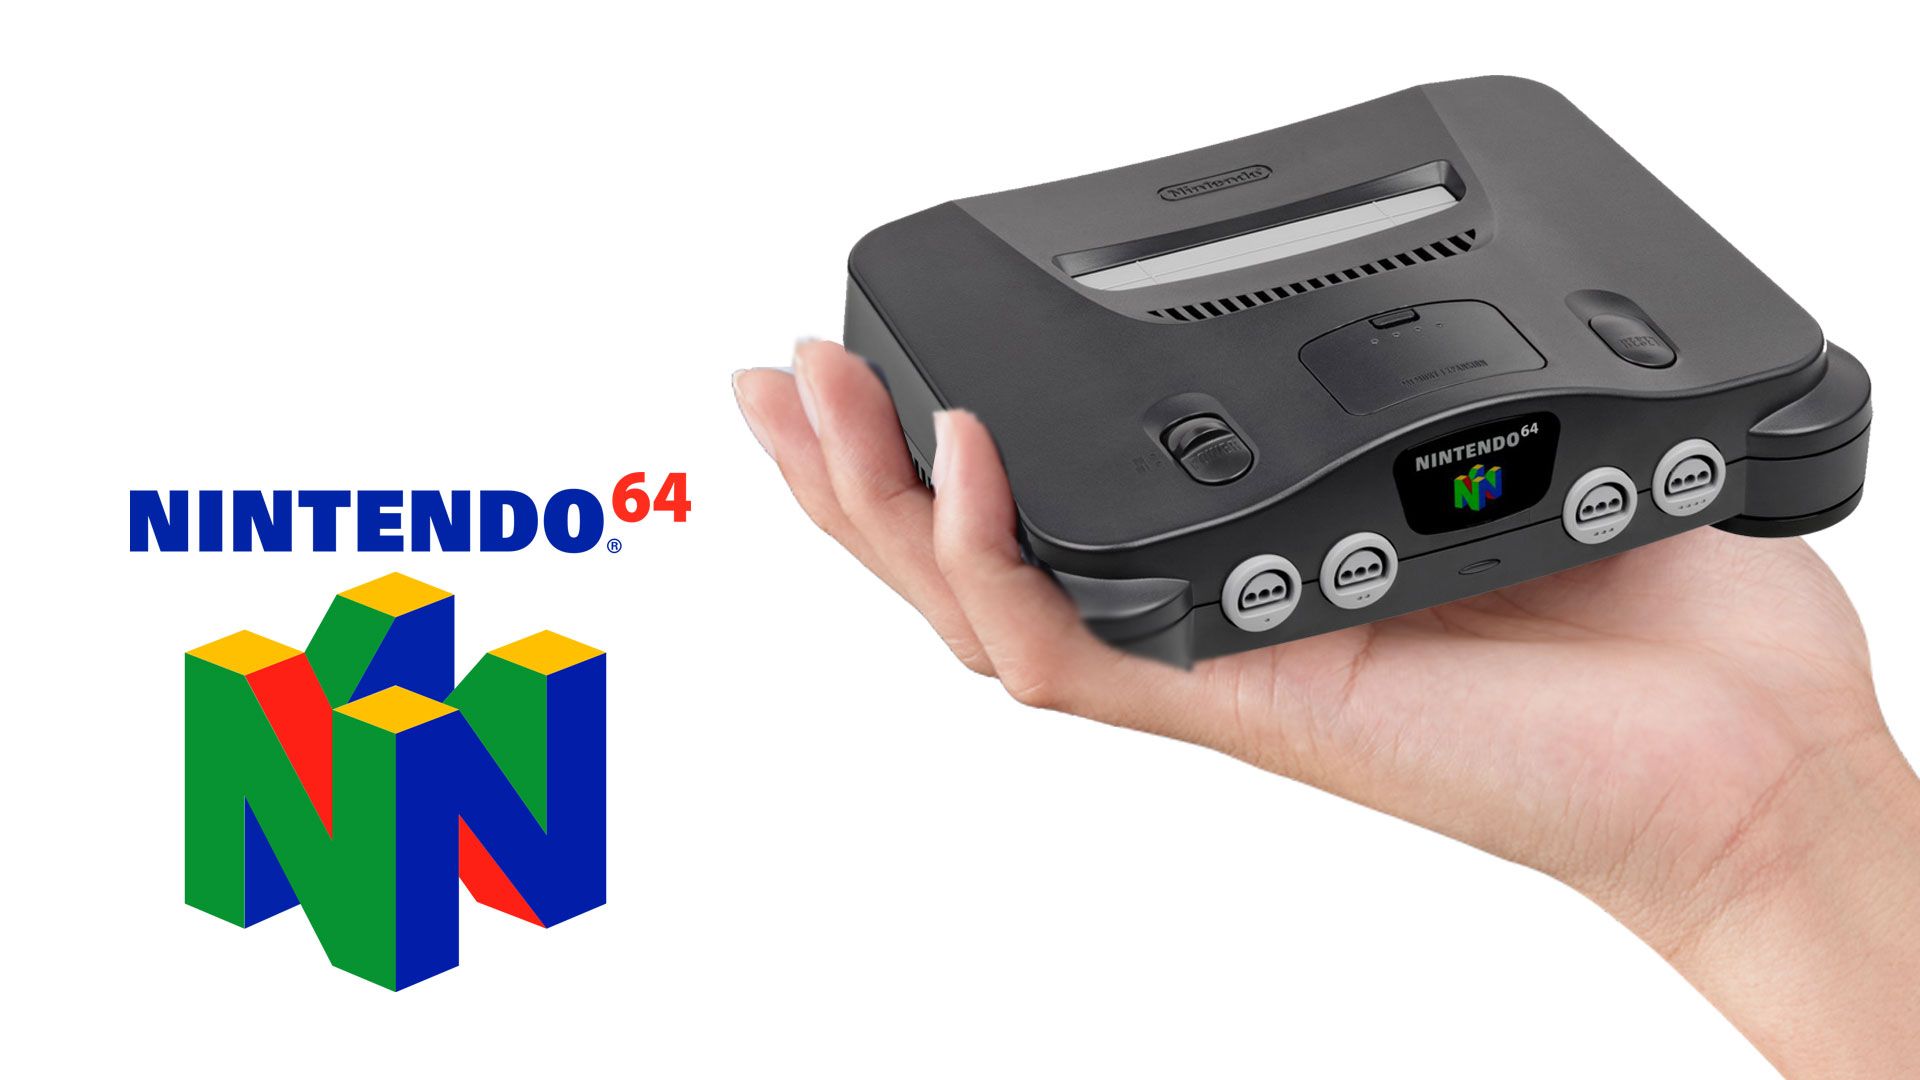 Nintendo 64 Classic Edition 24 Games Want See on the System